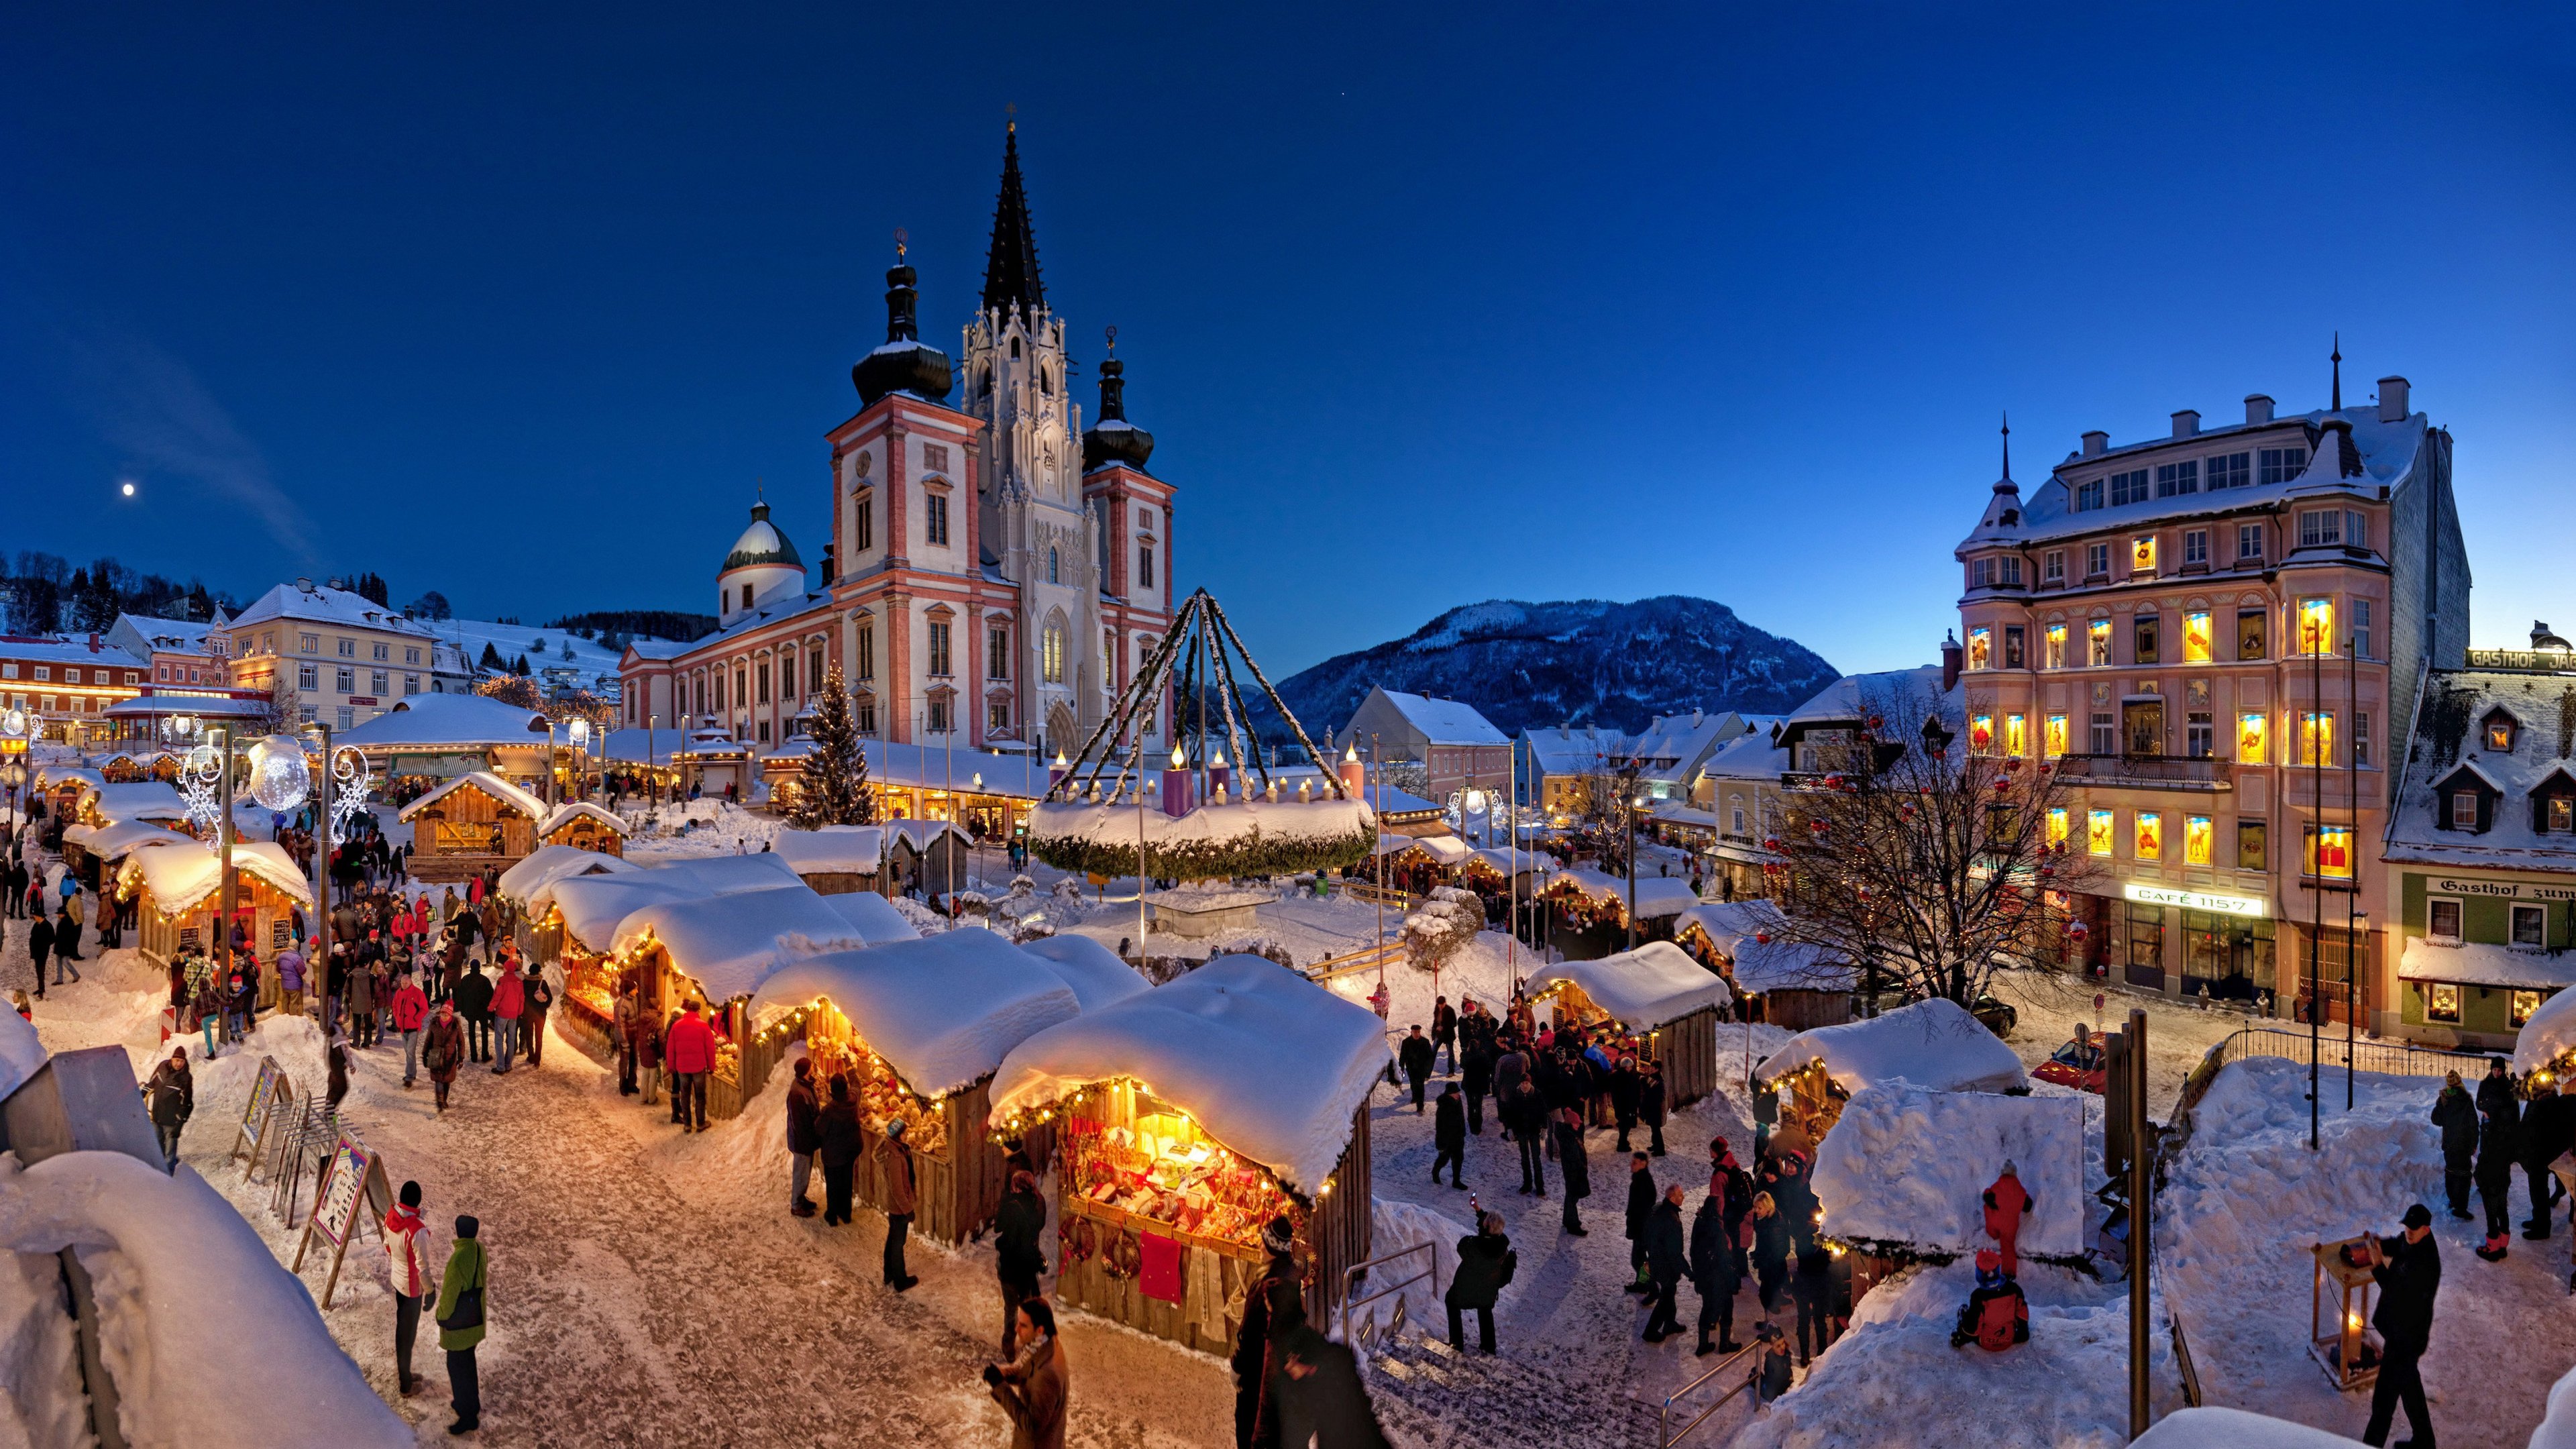 snow, decoration, market, people, night, square, light, christmas, holiday, building, city QHD